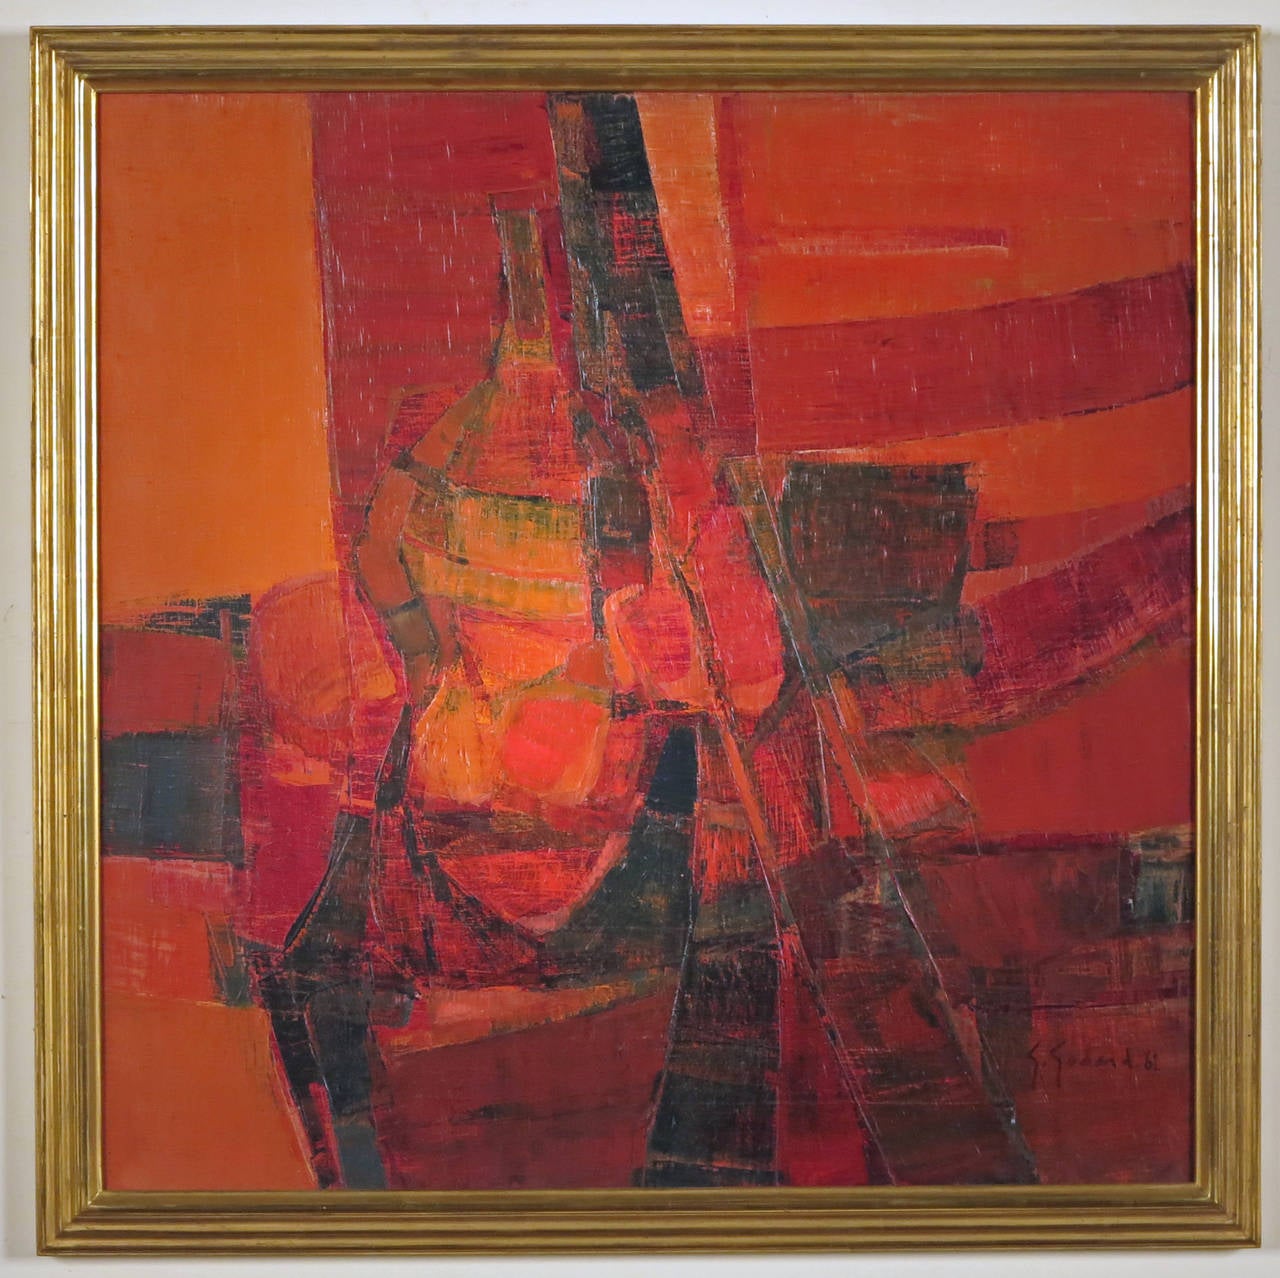 Gabriel Godard
French, Born 1933
Nature Morte Rouge

Oil on canvas
29 ½ by 29 ½ in. W/frame 33 ½ by 33 ½ in.
Signed lower right & dated 61

Gabriel Godard was born on April 28, 1933 in Delouze in Lorraine.  He started painting in 1950 with many